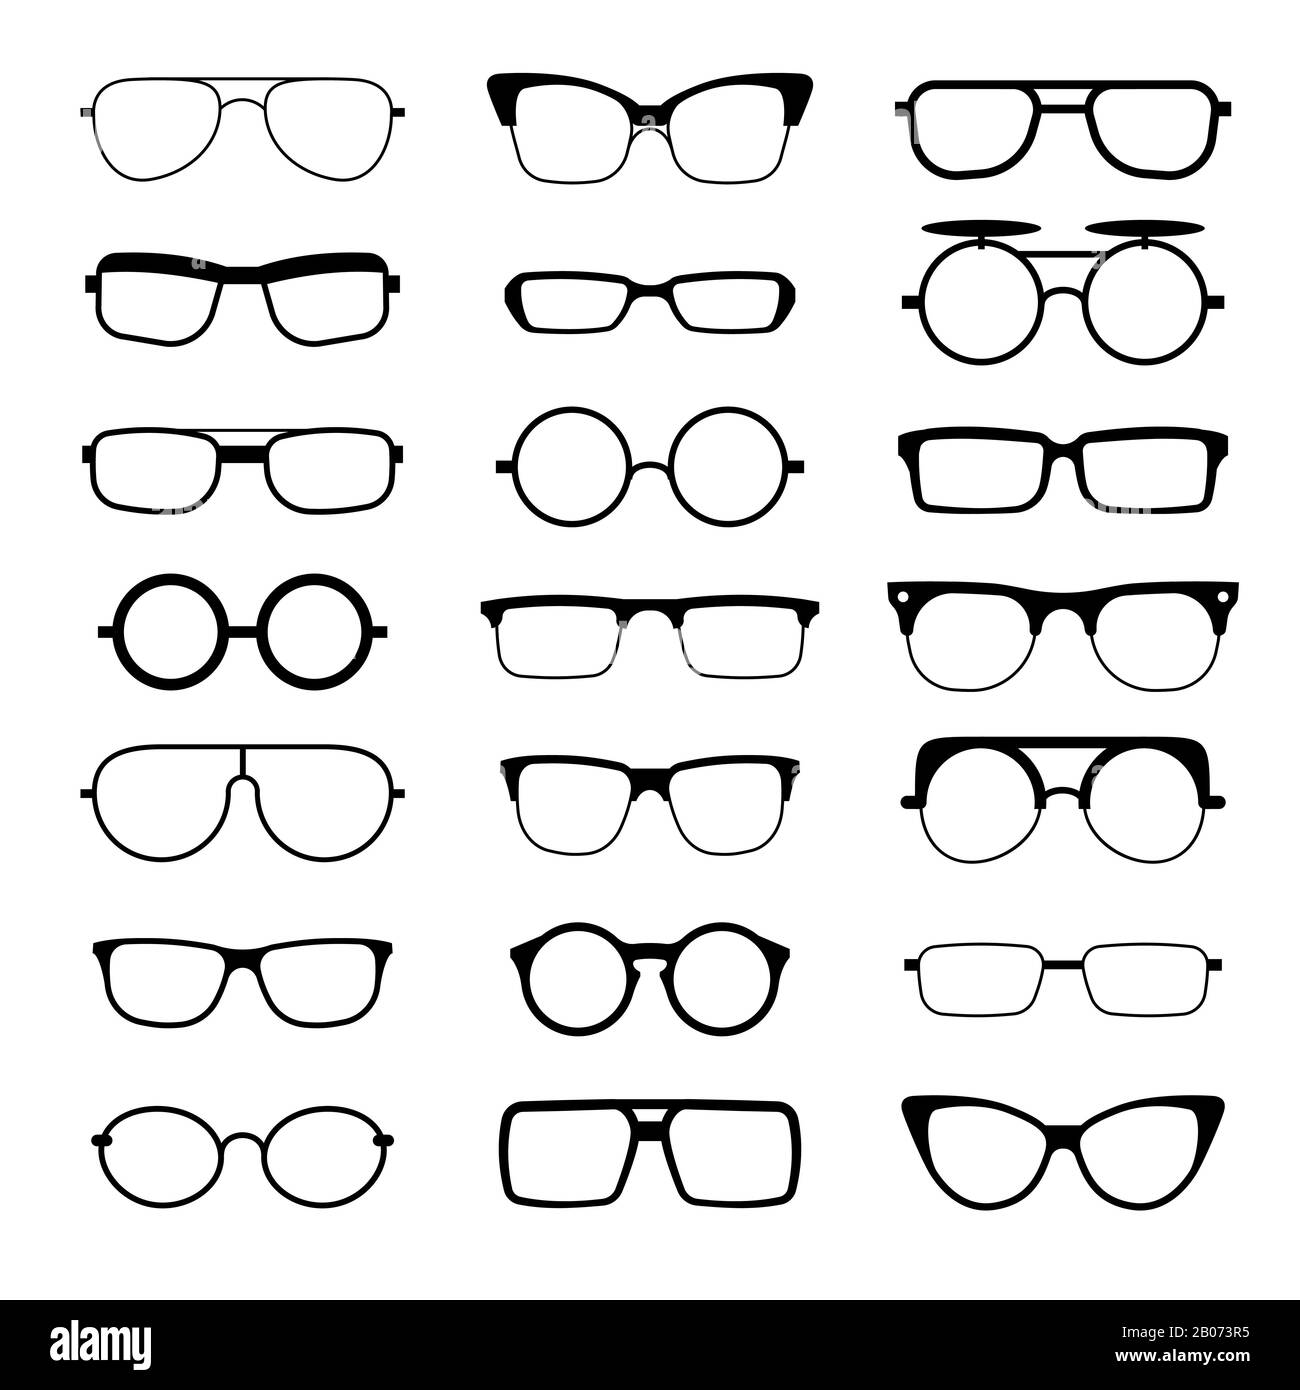 Sunglasses Eyeglasses Geek Glasses Different Model Shapes Vector Silhouettes Icons Fashion